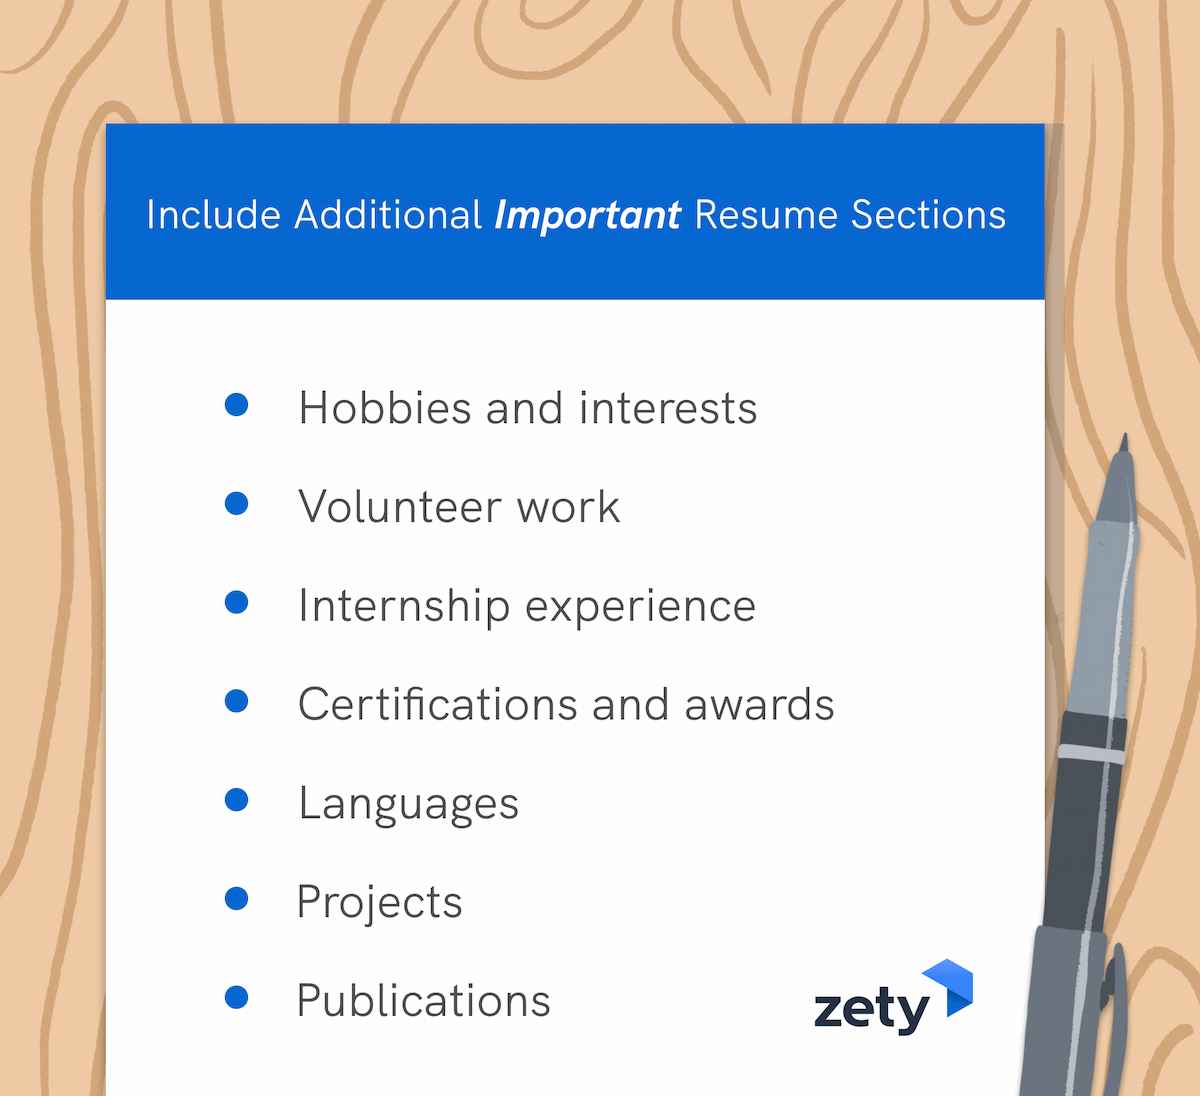 How to make your resume stand out with additional sections